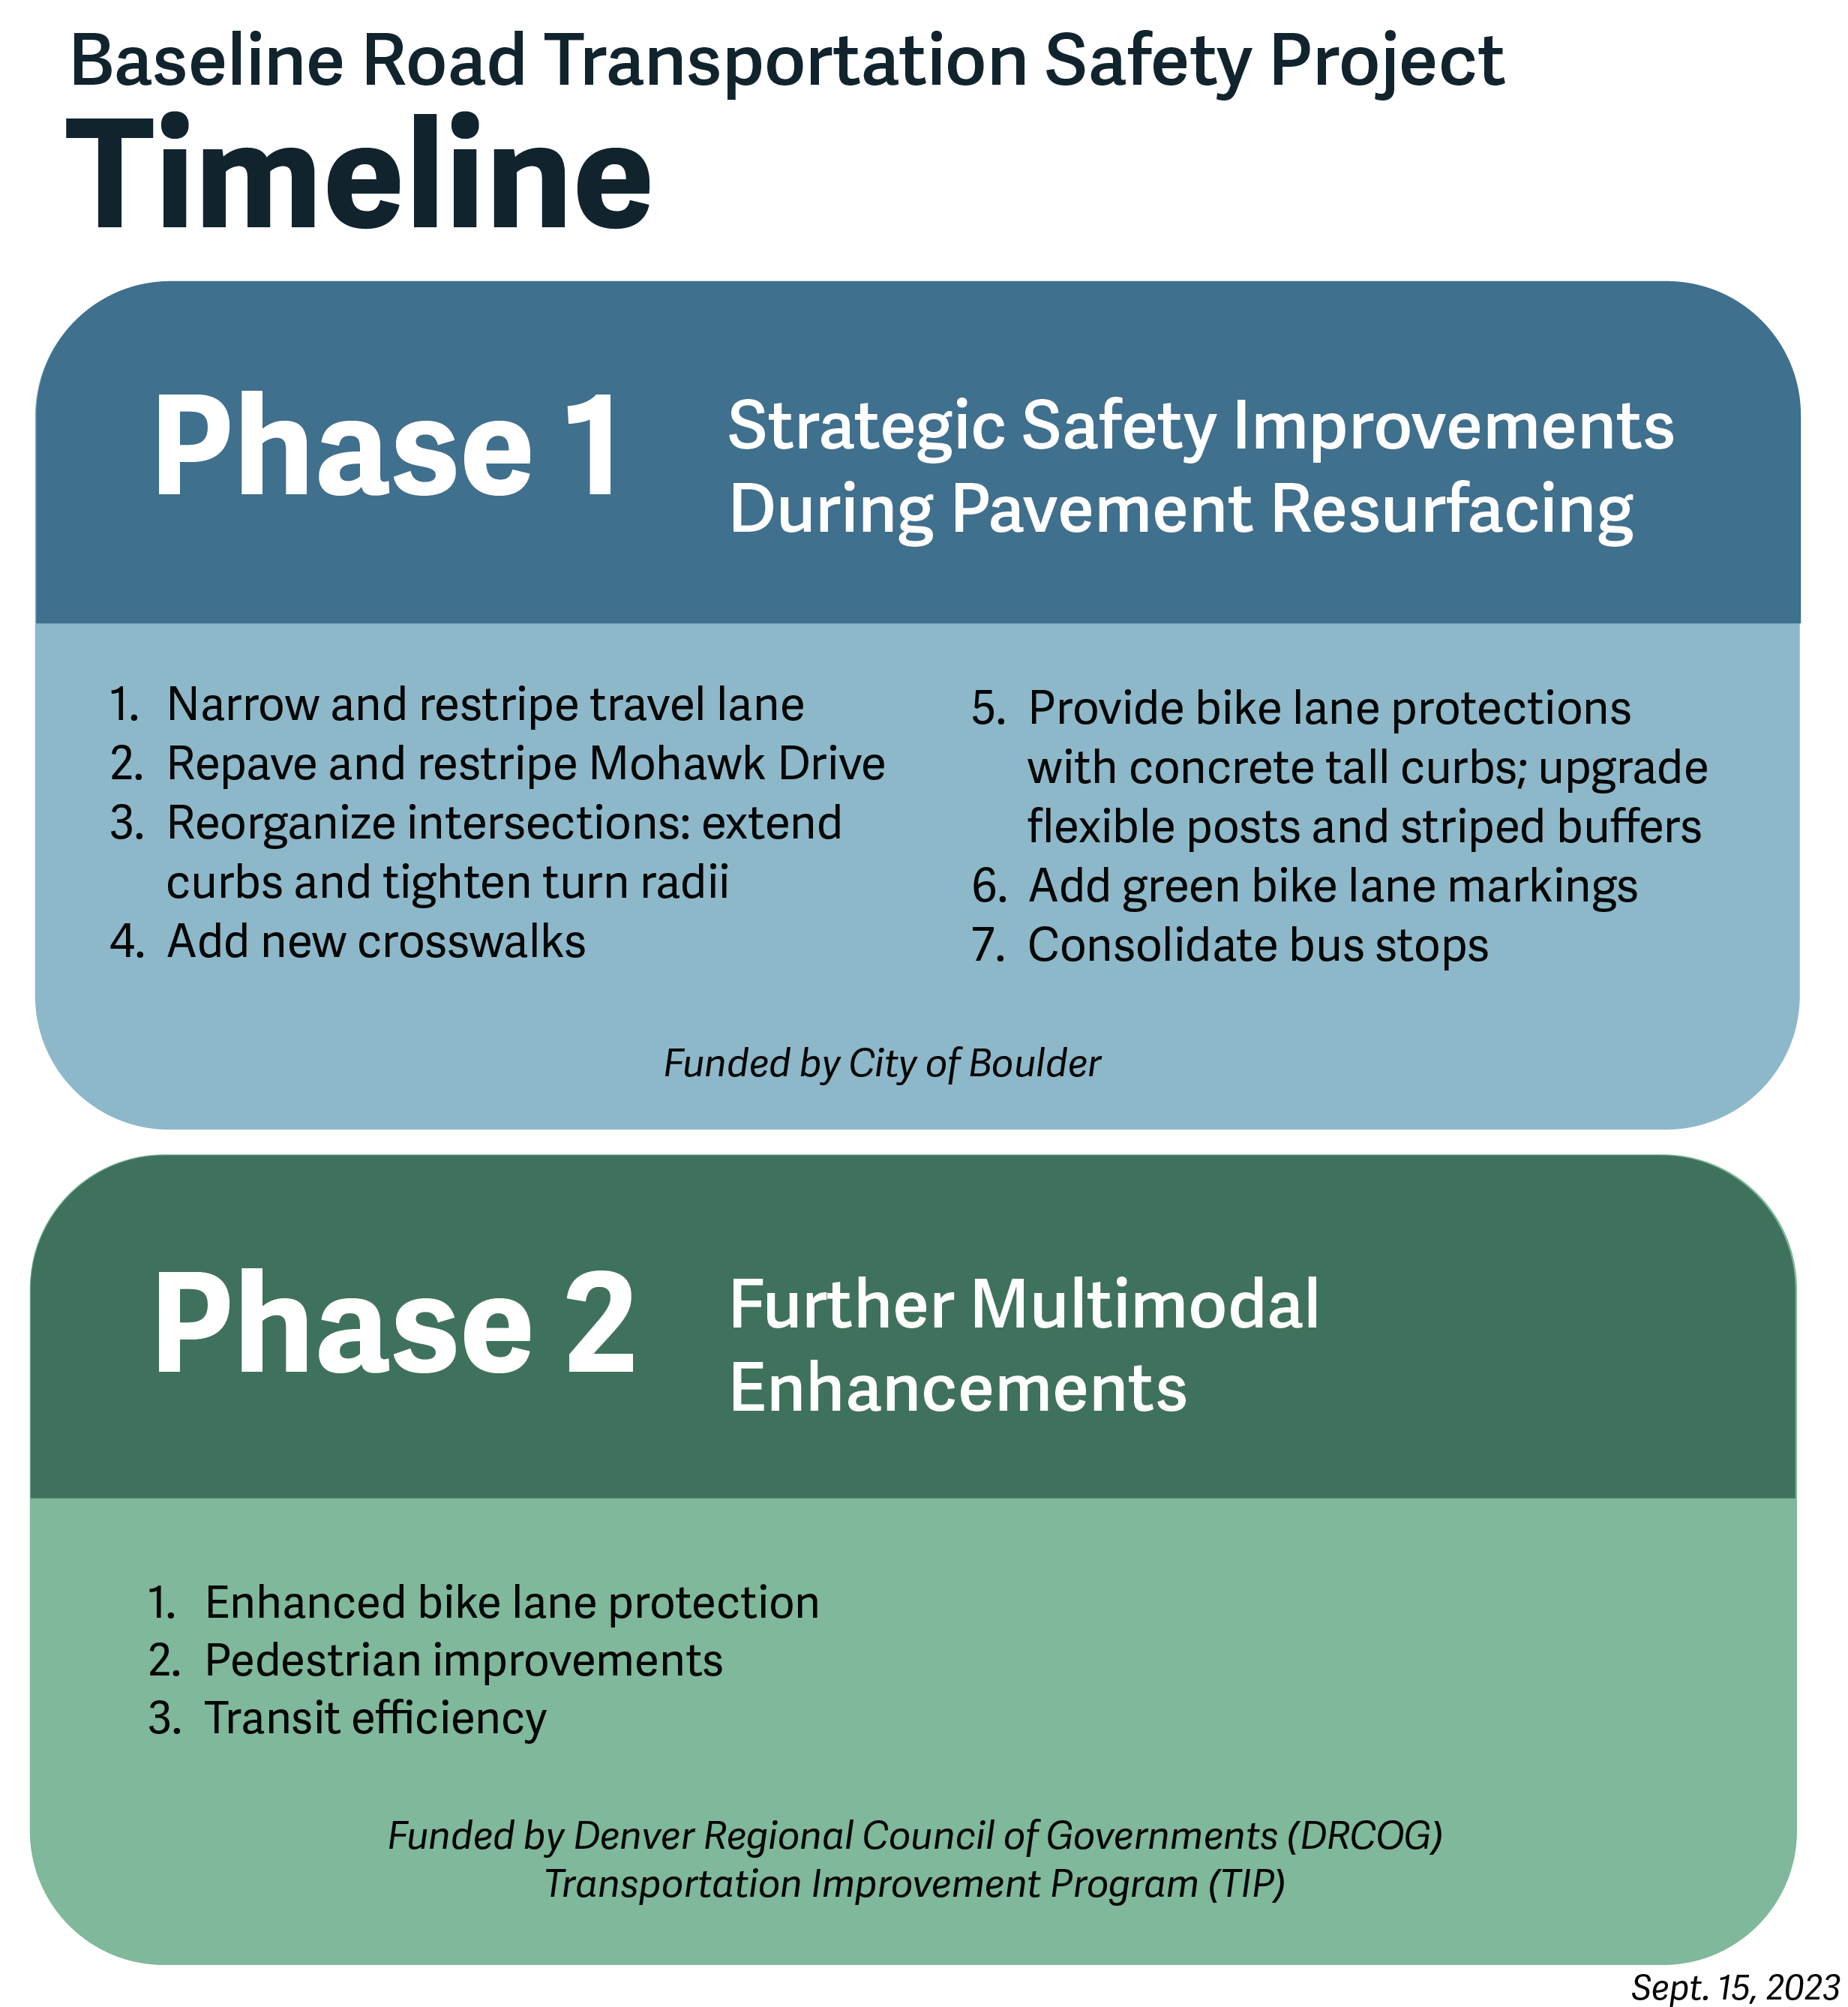 a visual graphic of the Baseline project timeline